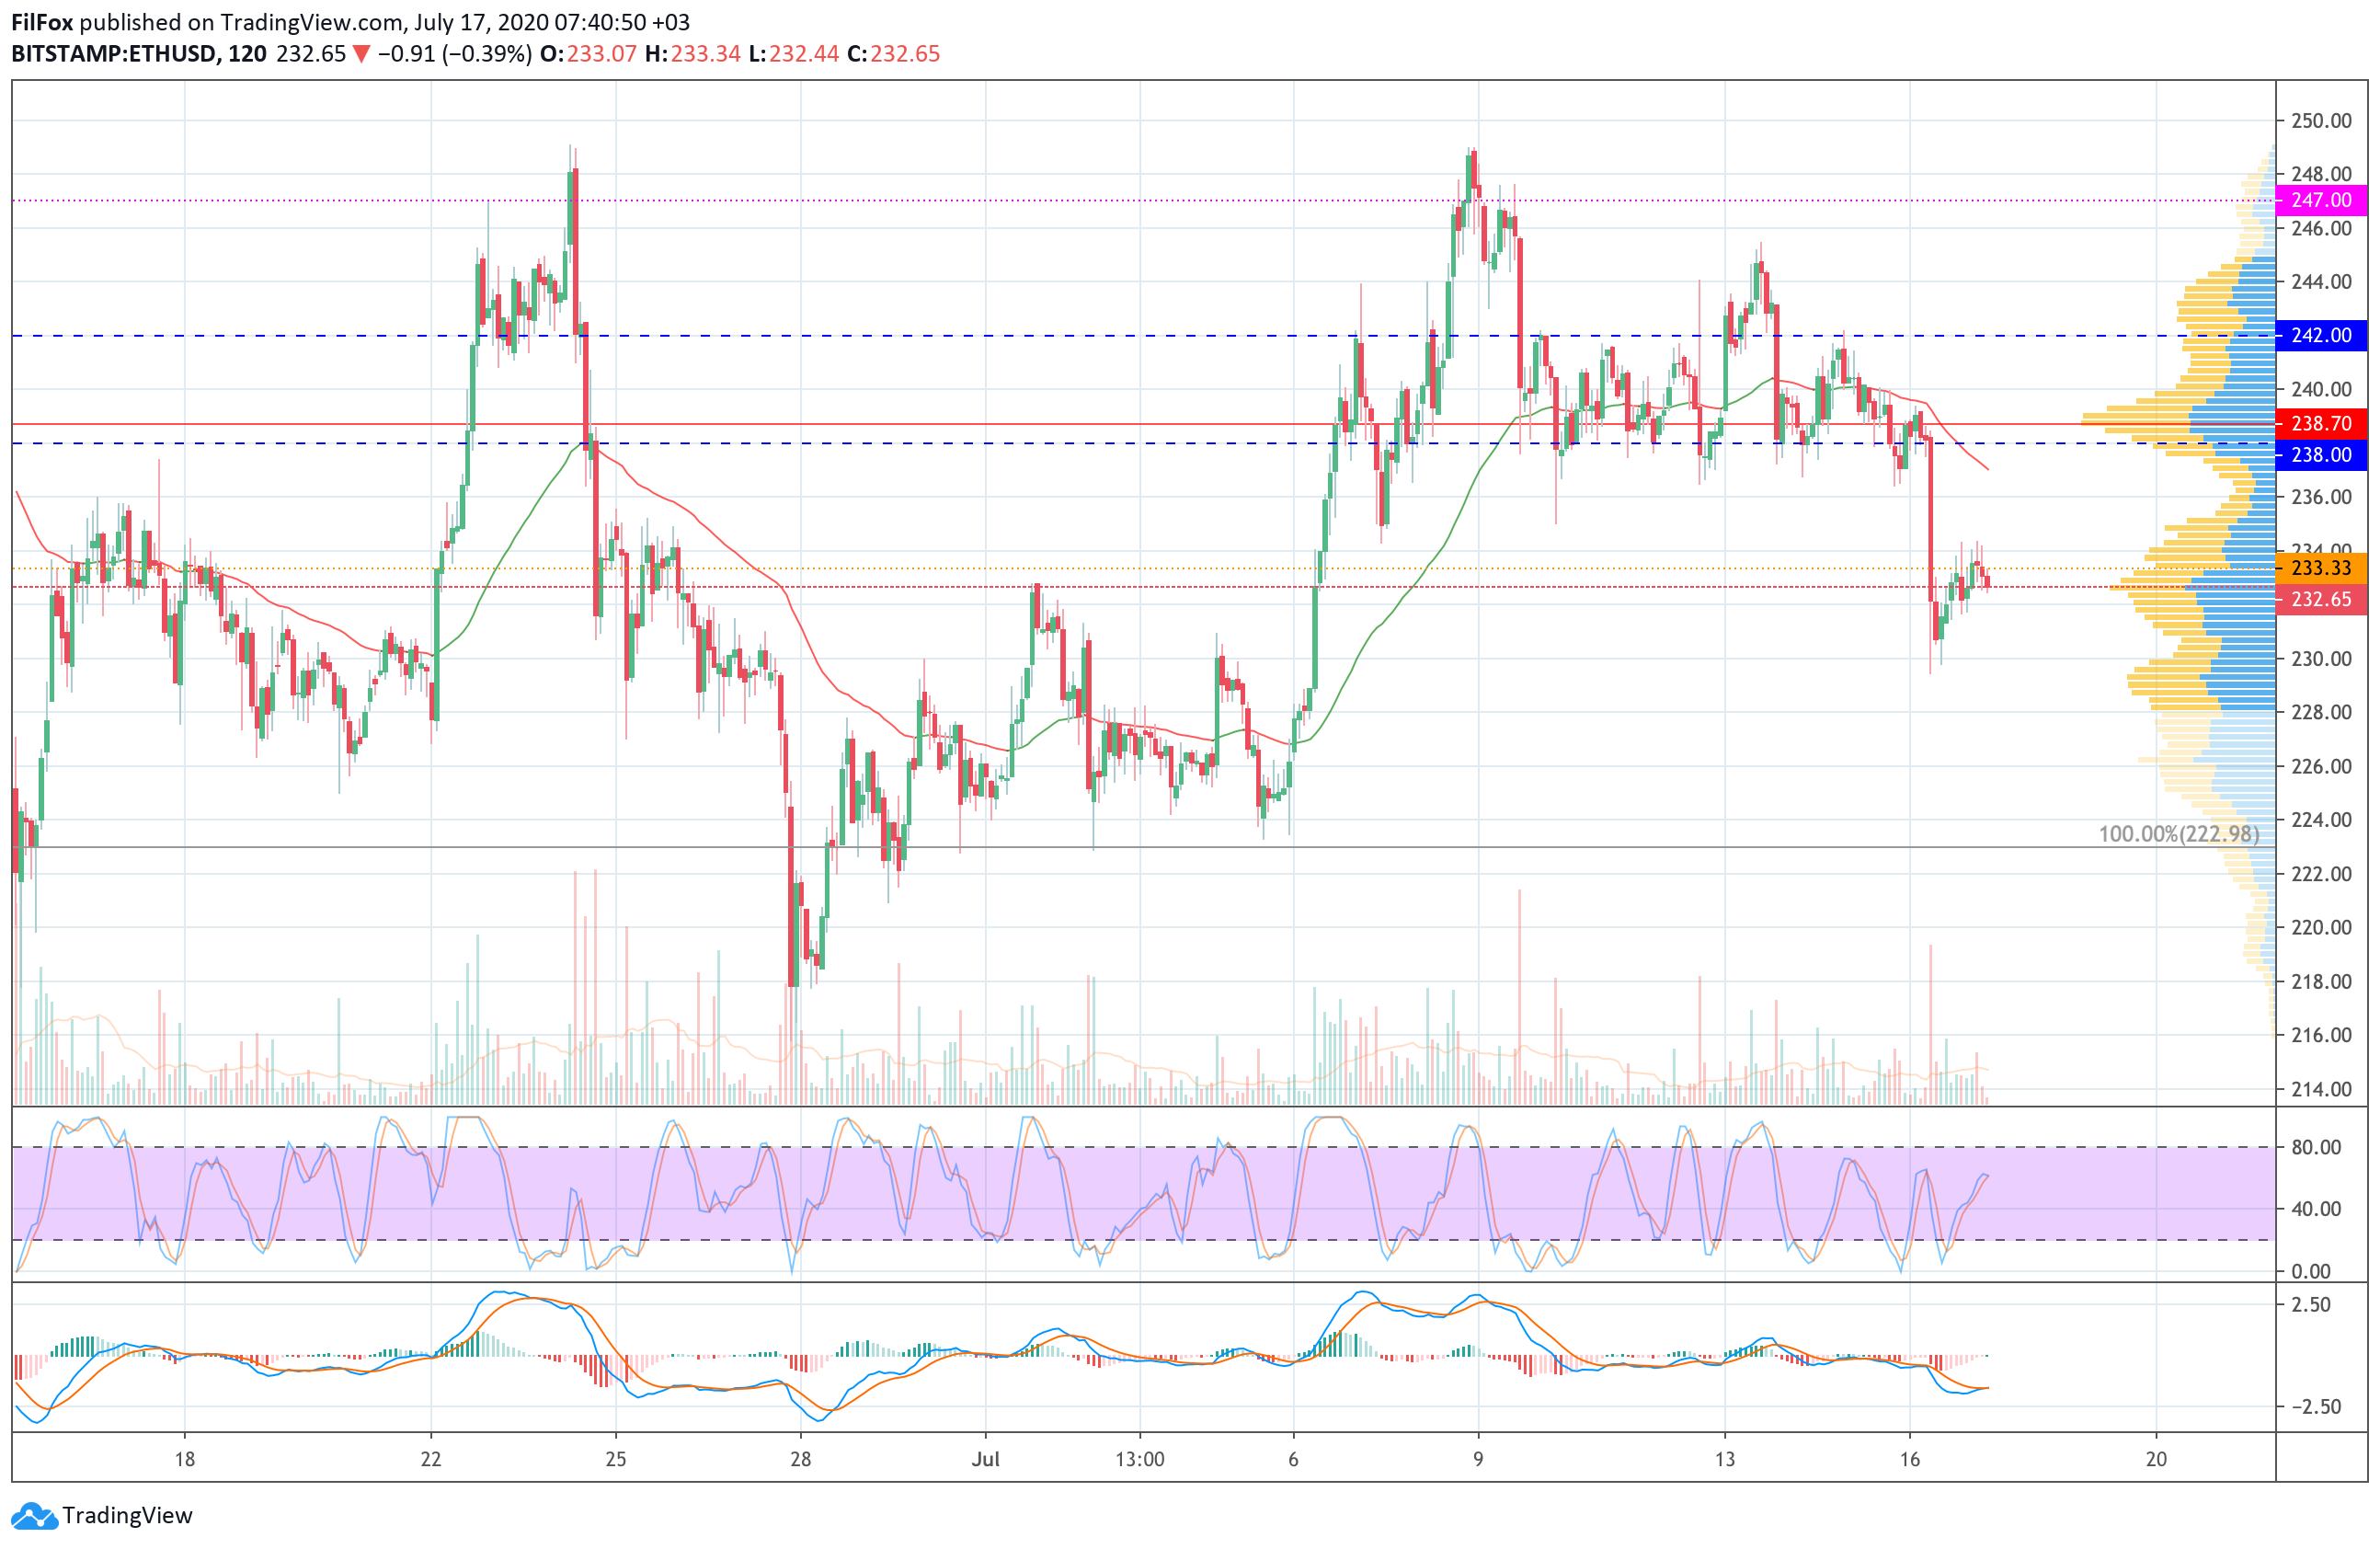 Analysis of prices for Bitcoin, Ethereum, XRP for 07/17/2020